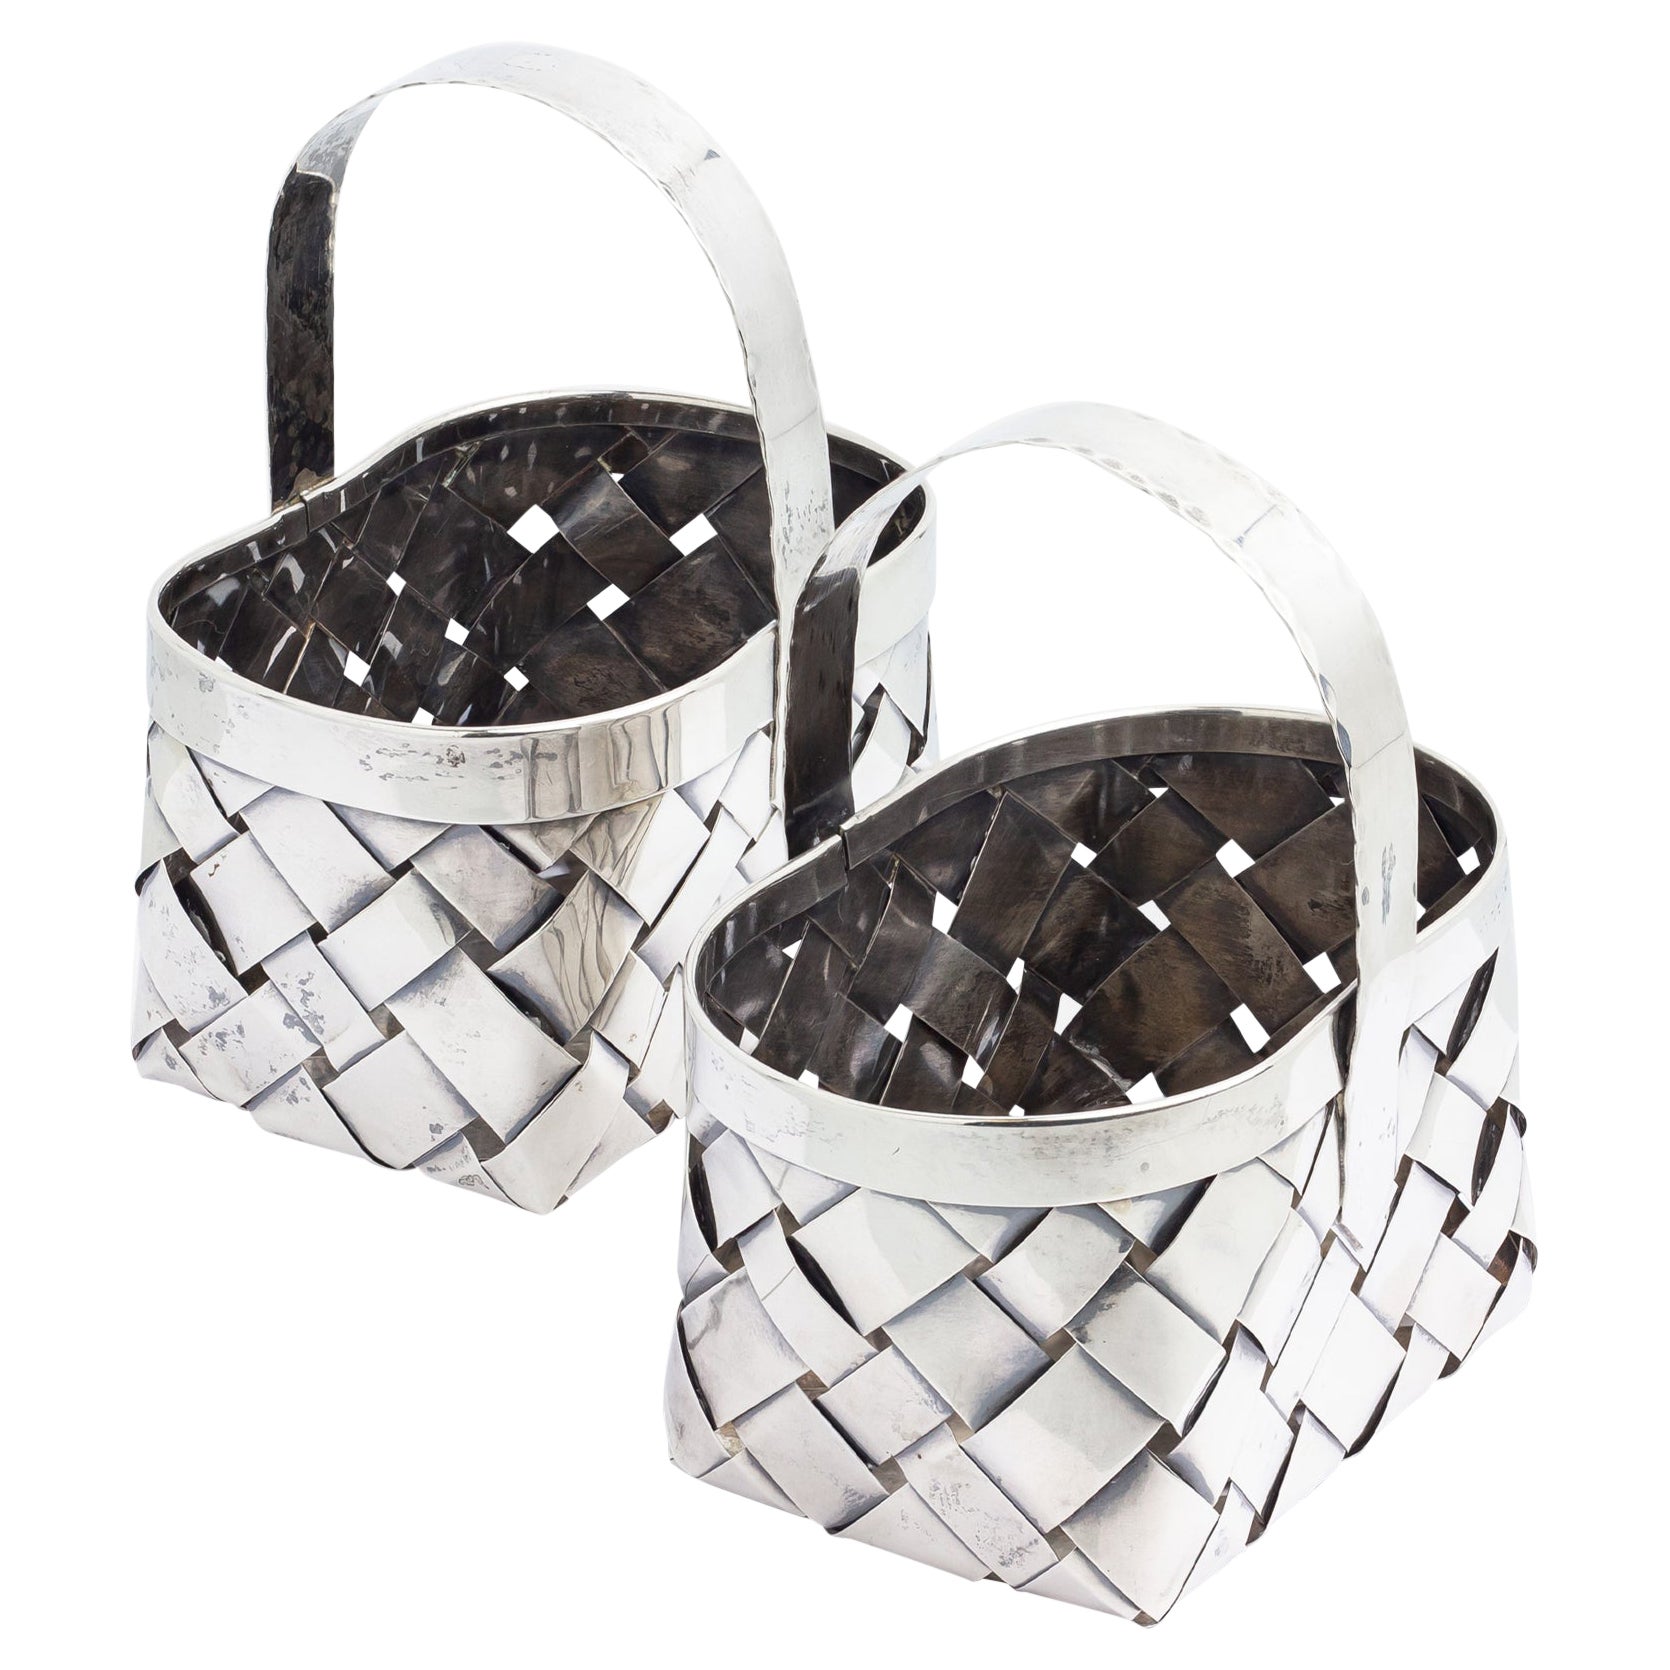 Pair of Handmade, 'Woven', Sterling Silver Baskets by Cartier